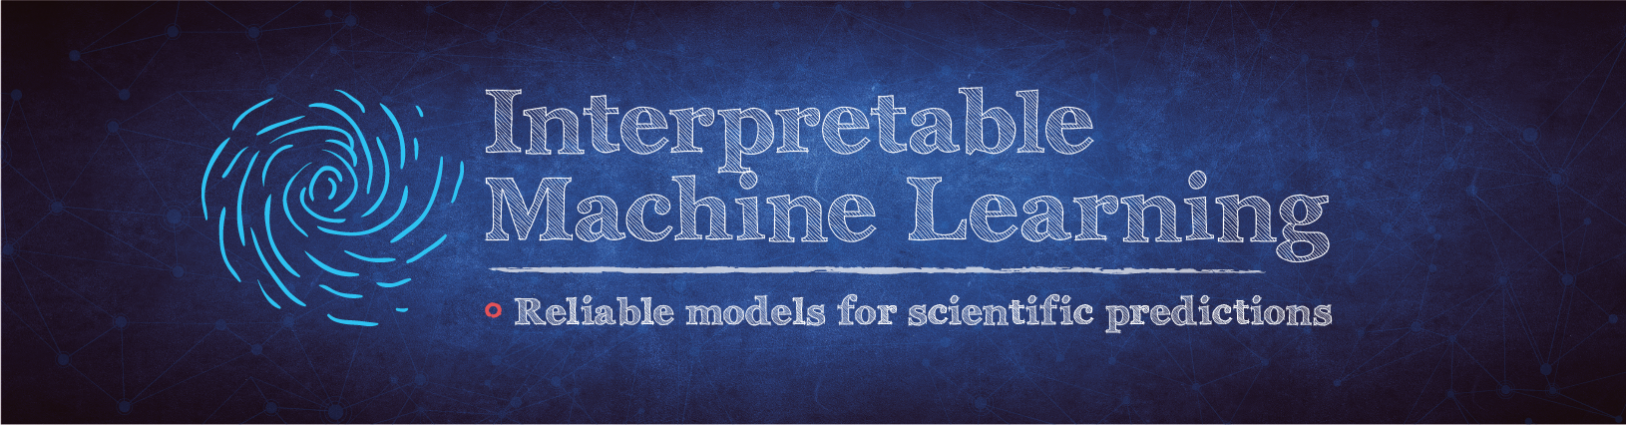 Blue chalkboard with text overlay: Interpretable Machine Learning, Reliable models for scientific predictions